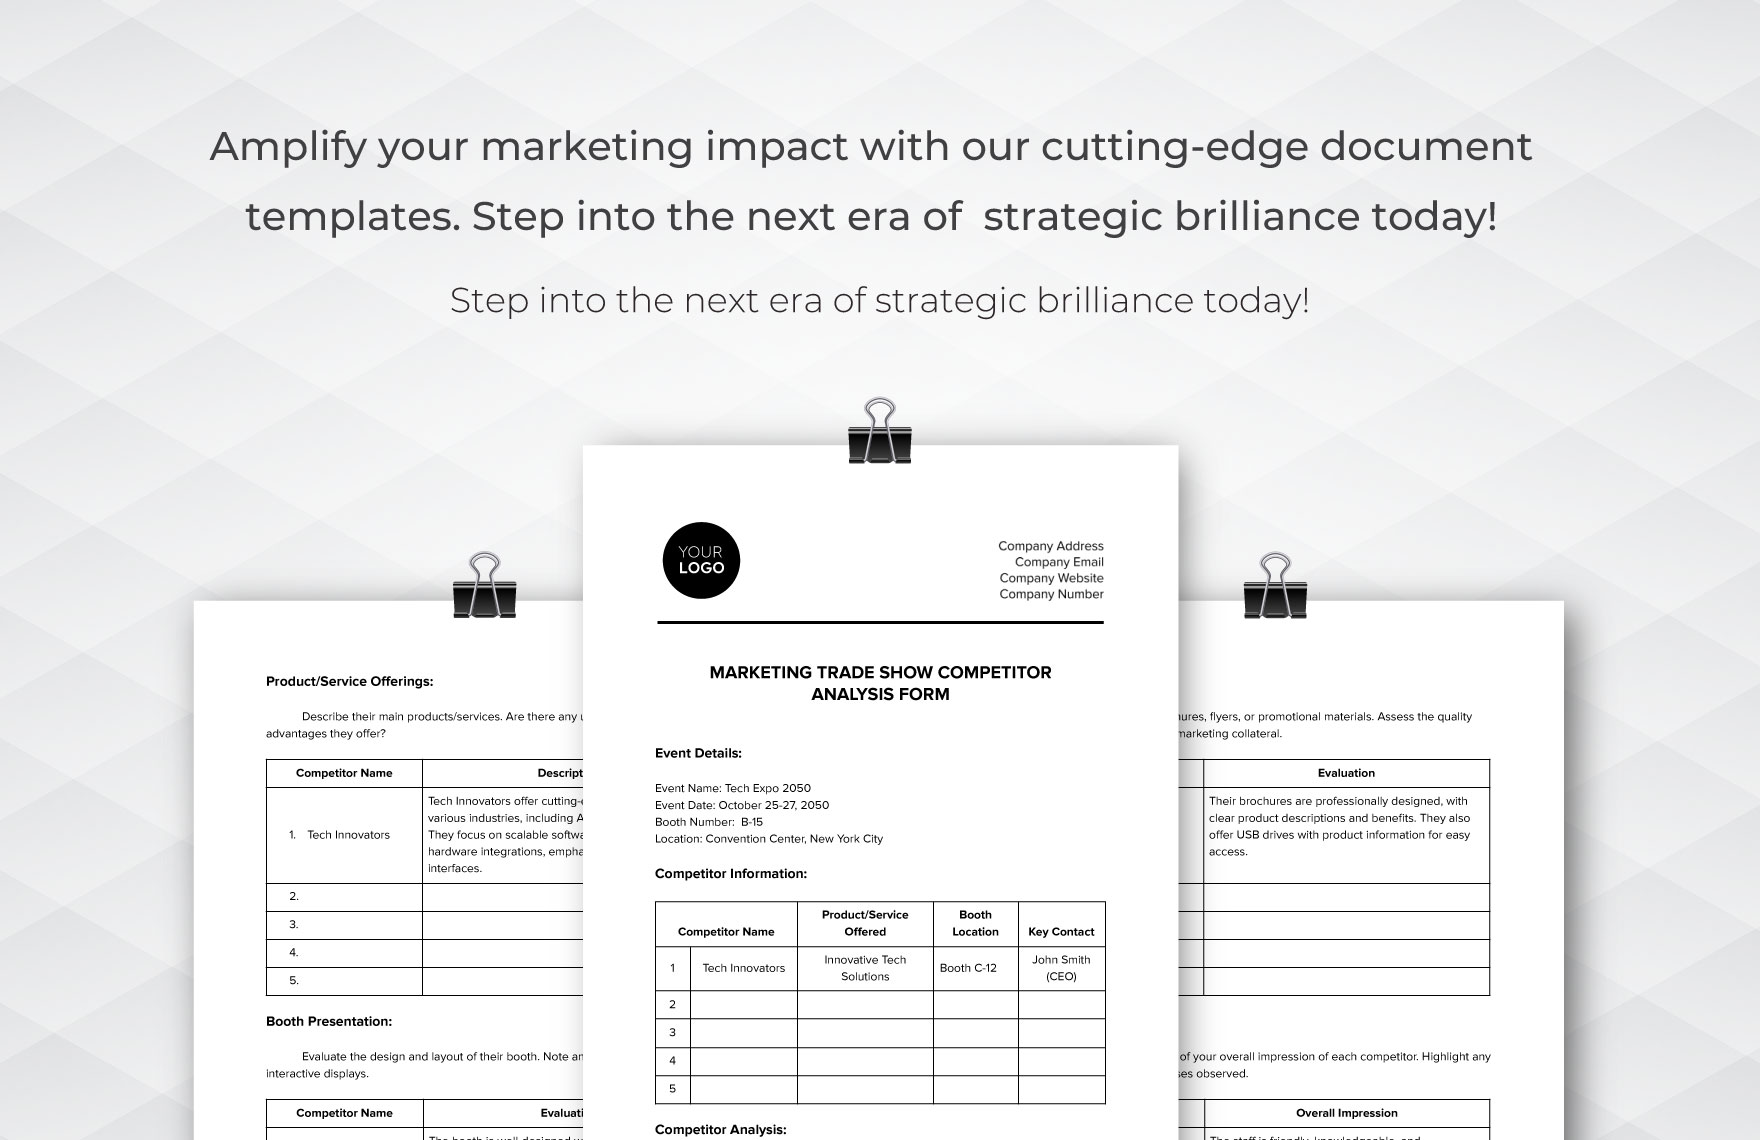 Marketing Trade Show Competitor Analysis Form Template